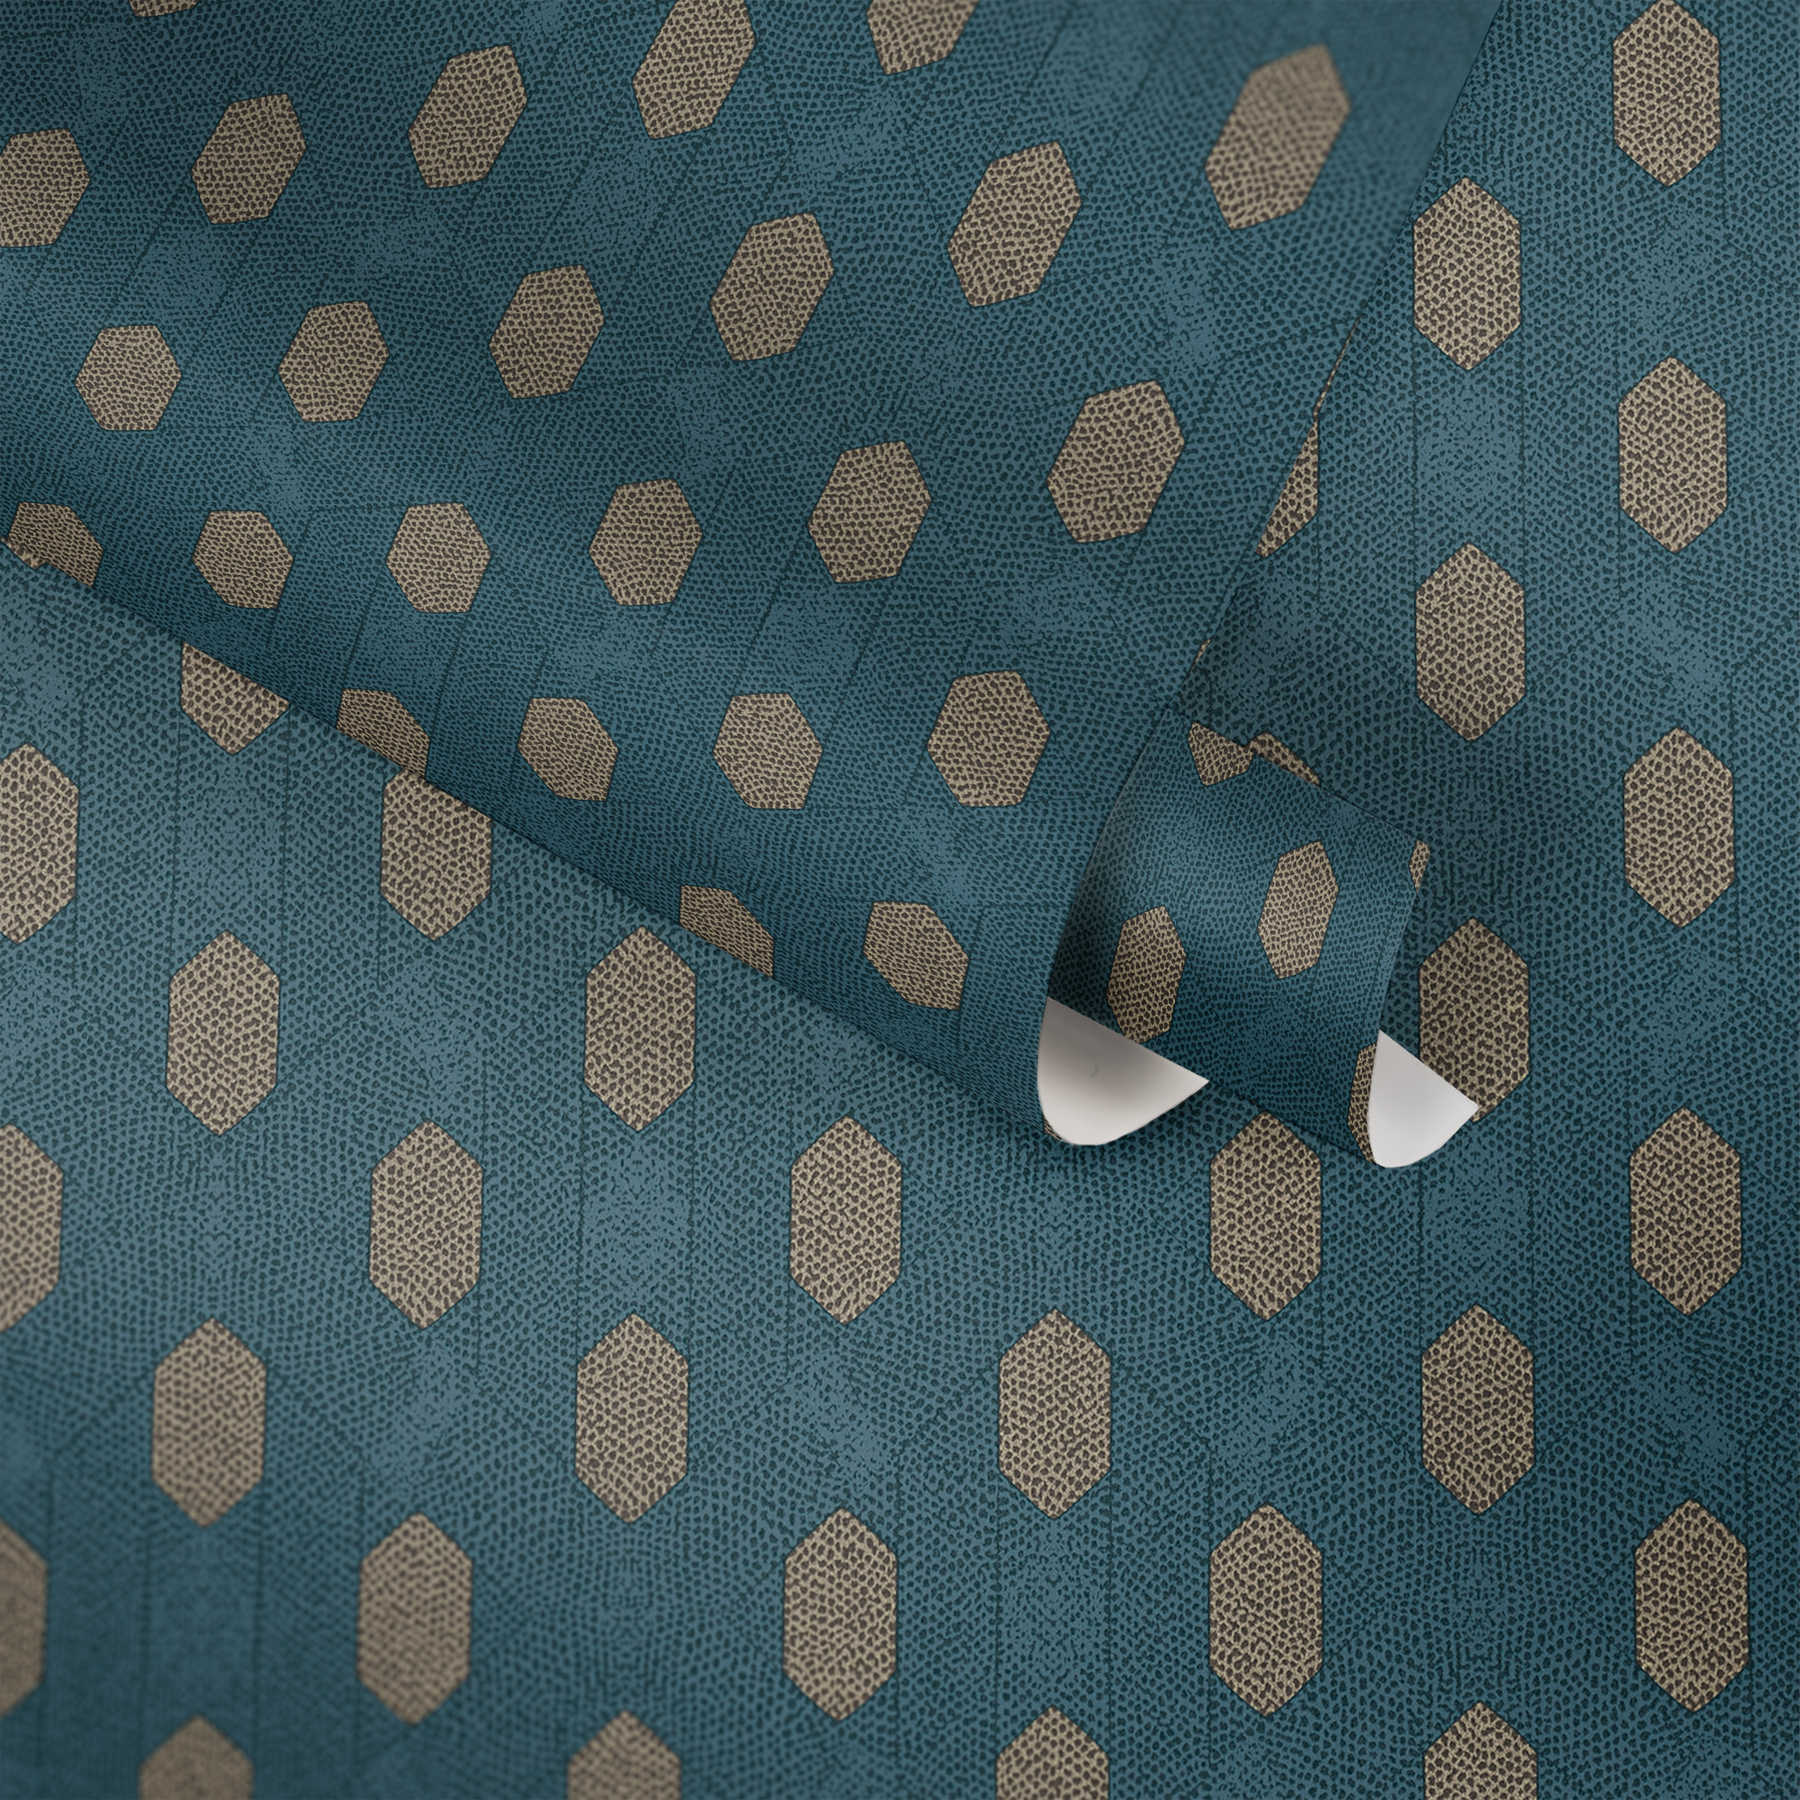             Blue wallpaper with geometric pattern & gold details - blue, brown, beige
        